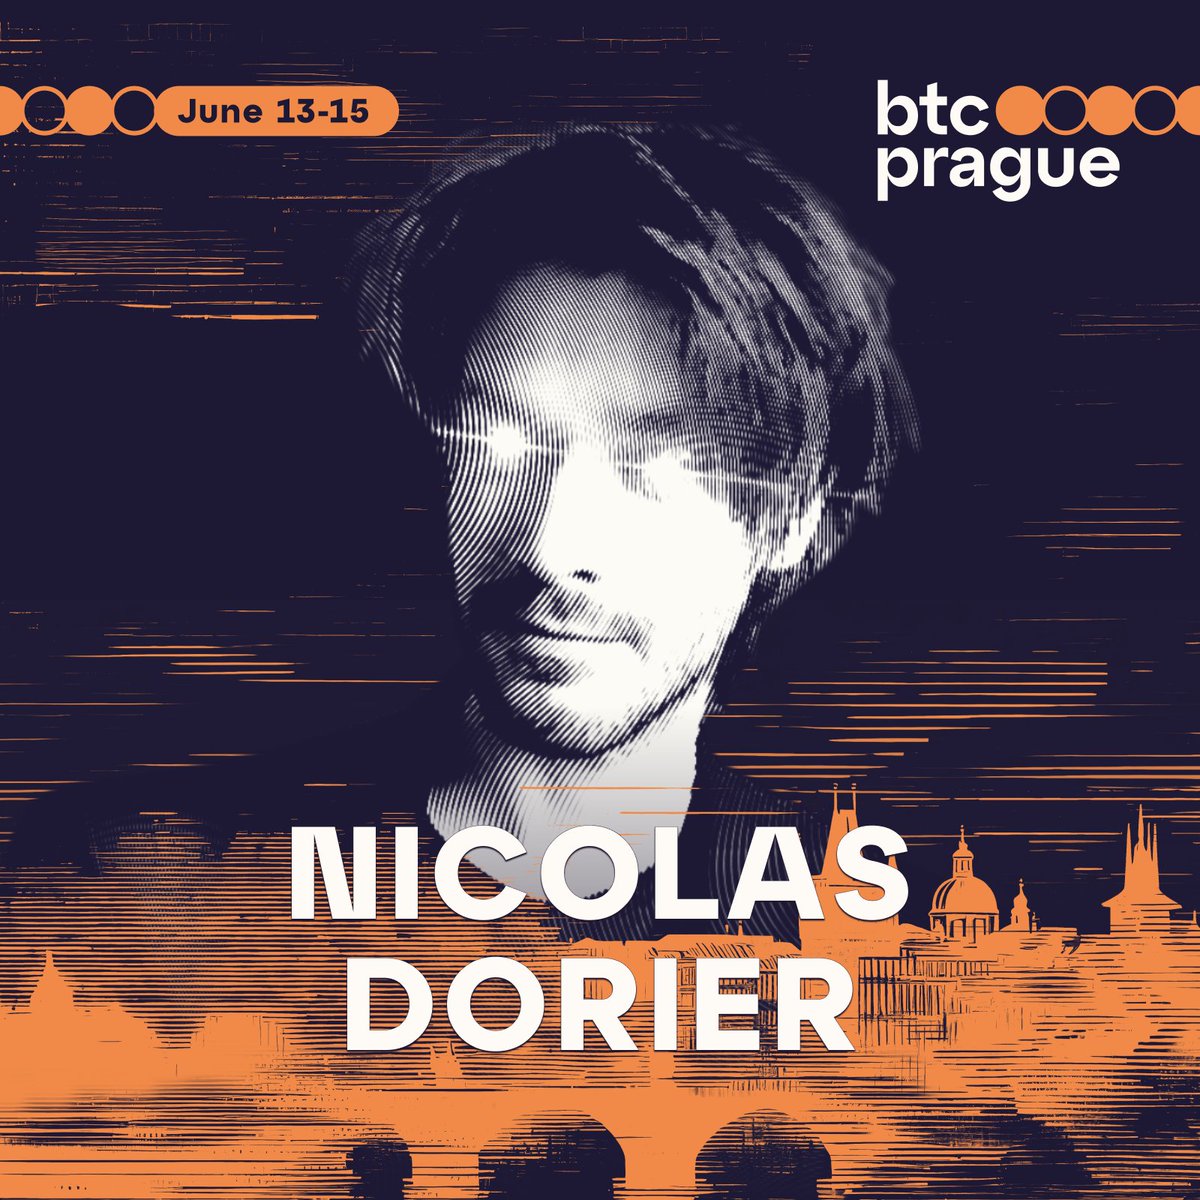 Staunch advocate for decentralization and financial sovereignty 👊 @NicolasDorier is a developer, best known as the founder of @BtcpayServer. He also developed NBitcoin, a comprehensive #bitcoin library for .NET, and NBXplorer, an efficient lightweight blockchain explorer.